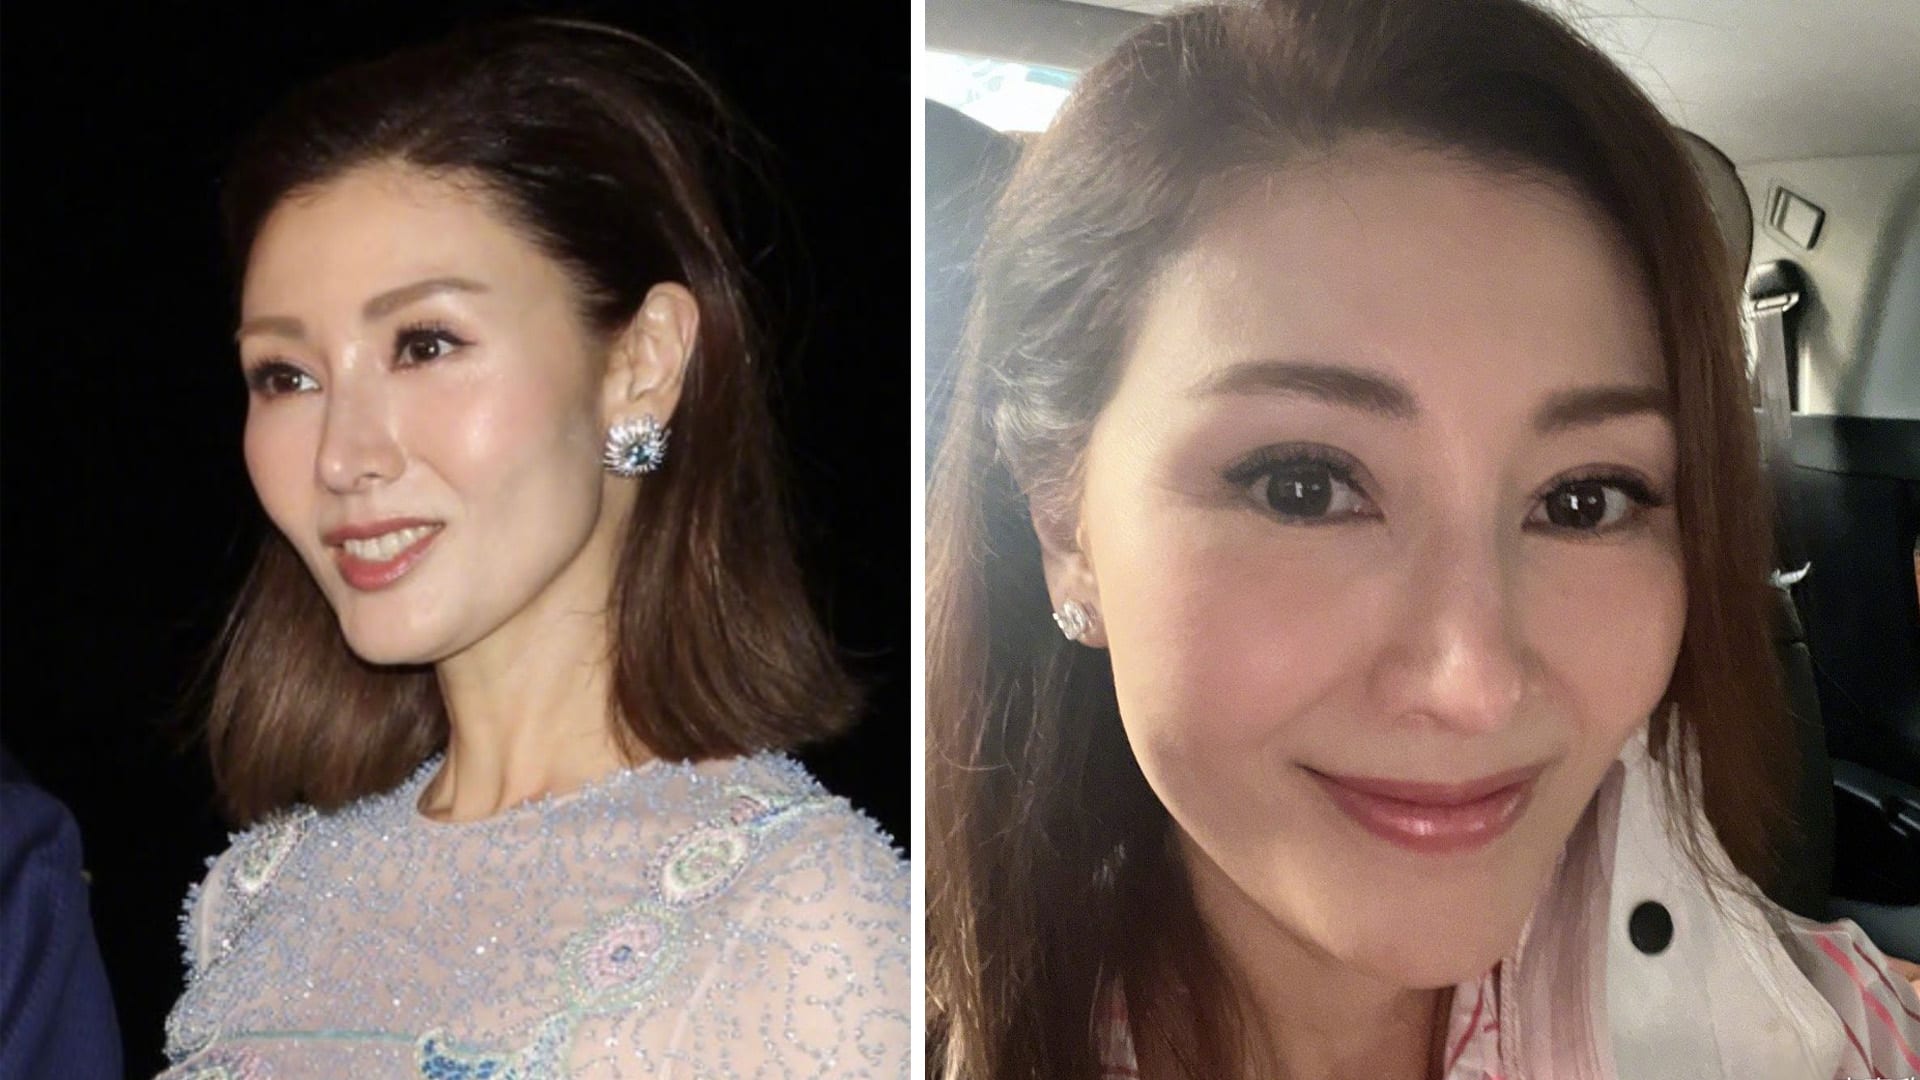 Michelle Reis, 51, Posts Retouched And Unretouched Pics Of Herself, Netizens Say There’s “No Difference At All”